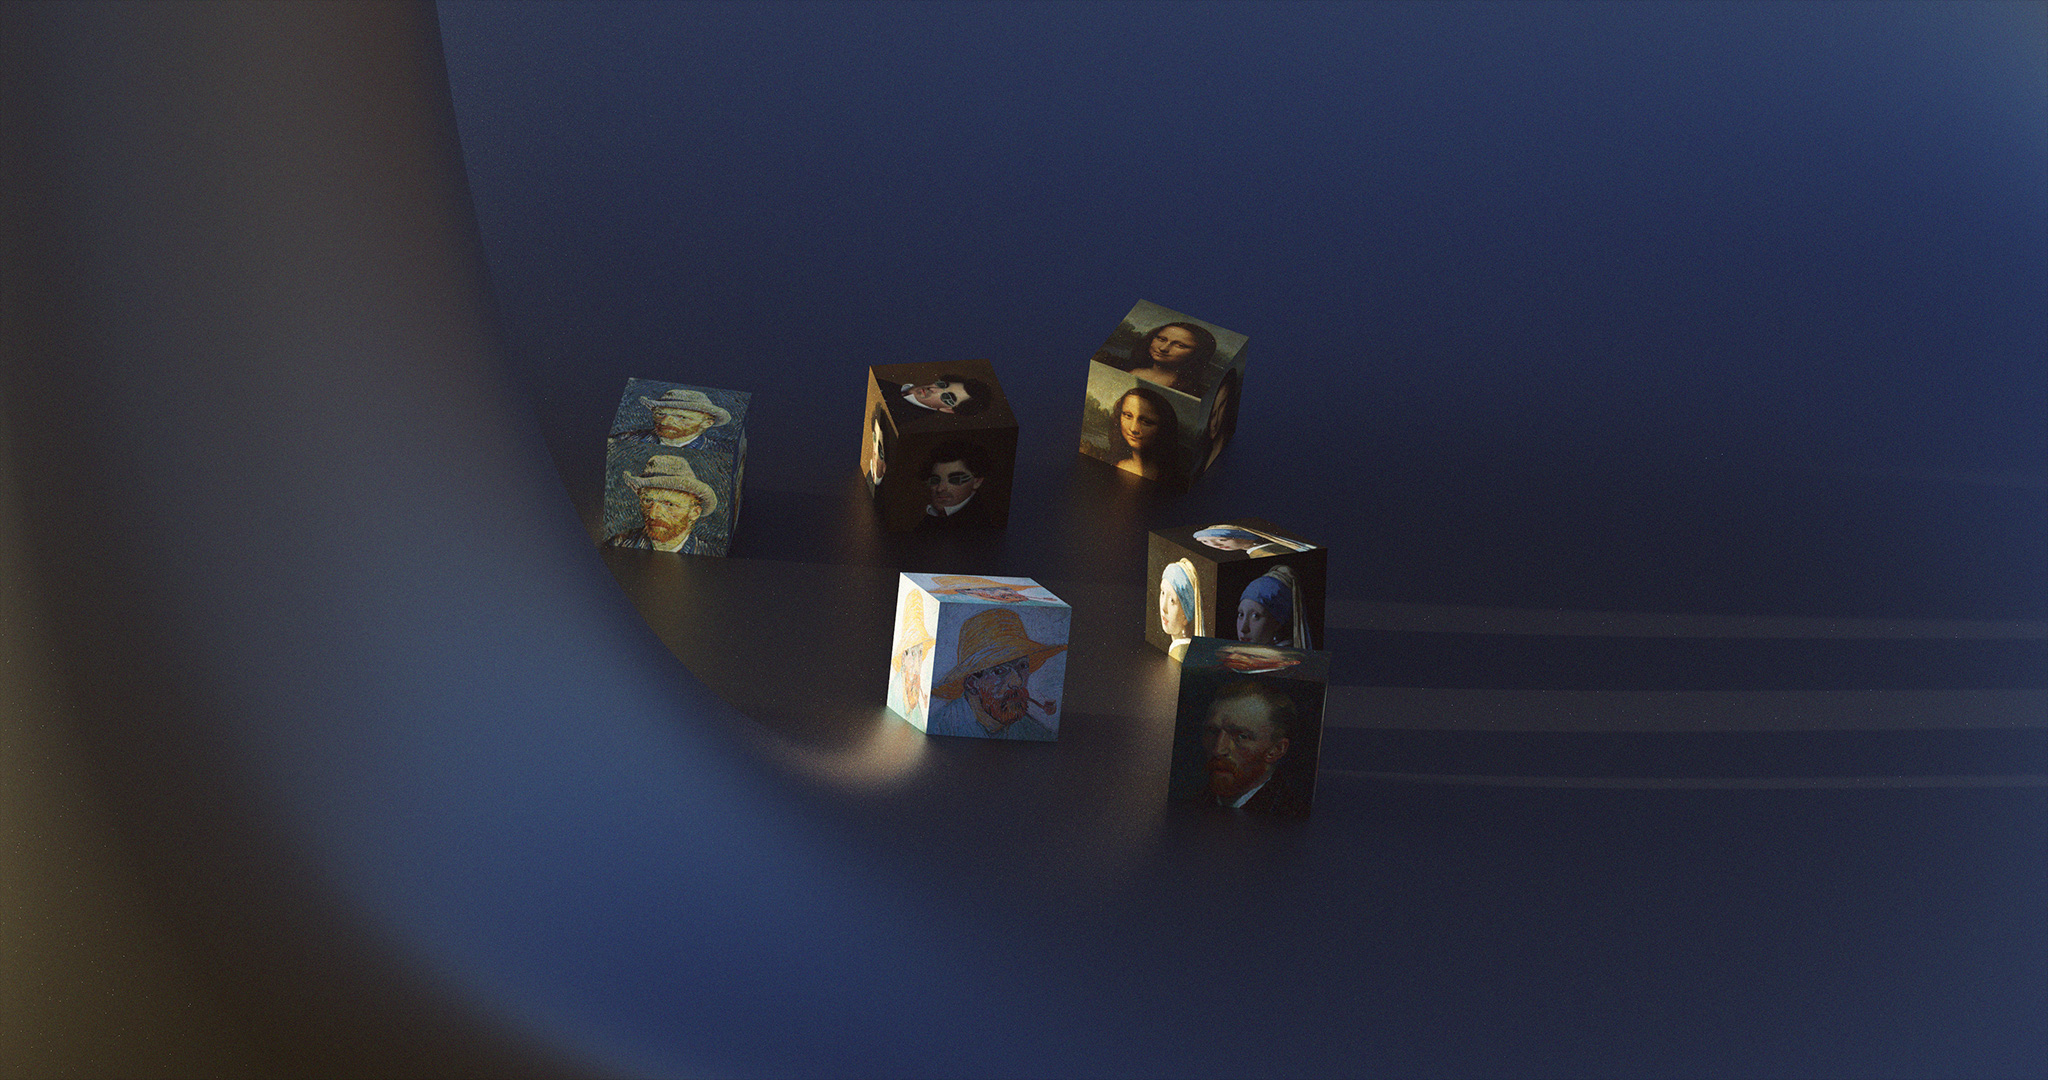 3D render of six cubes with faces from famous portrait paintings, placed on a warped, dark, metallic surface. This scene is meant to represent different audience personas that we created for this project.